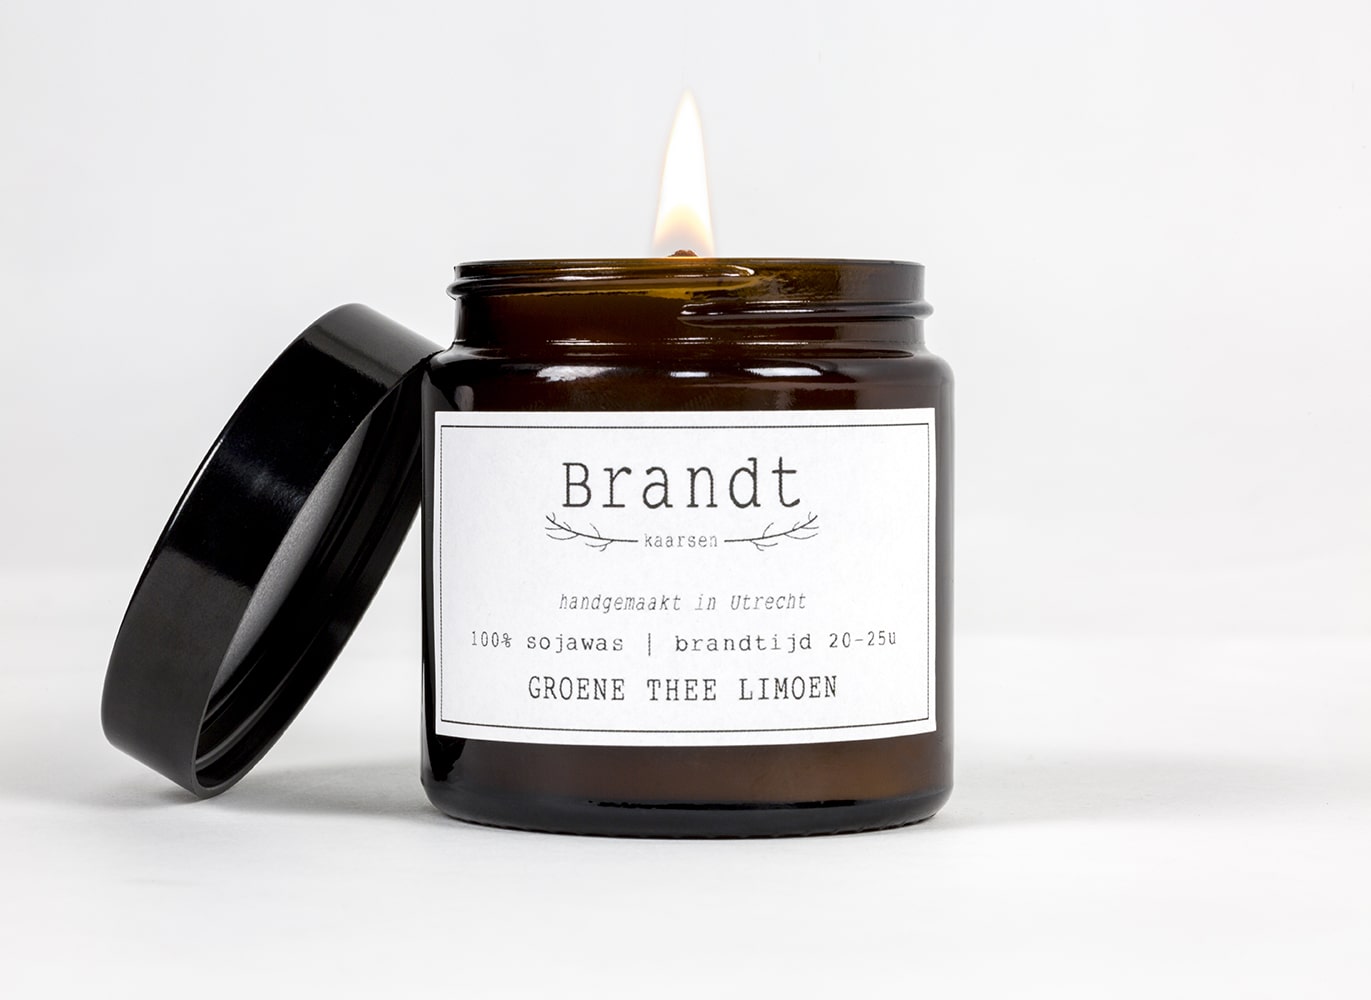 Apothecary candle by Brandt - green tea lime